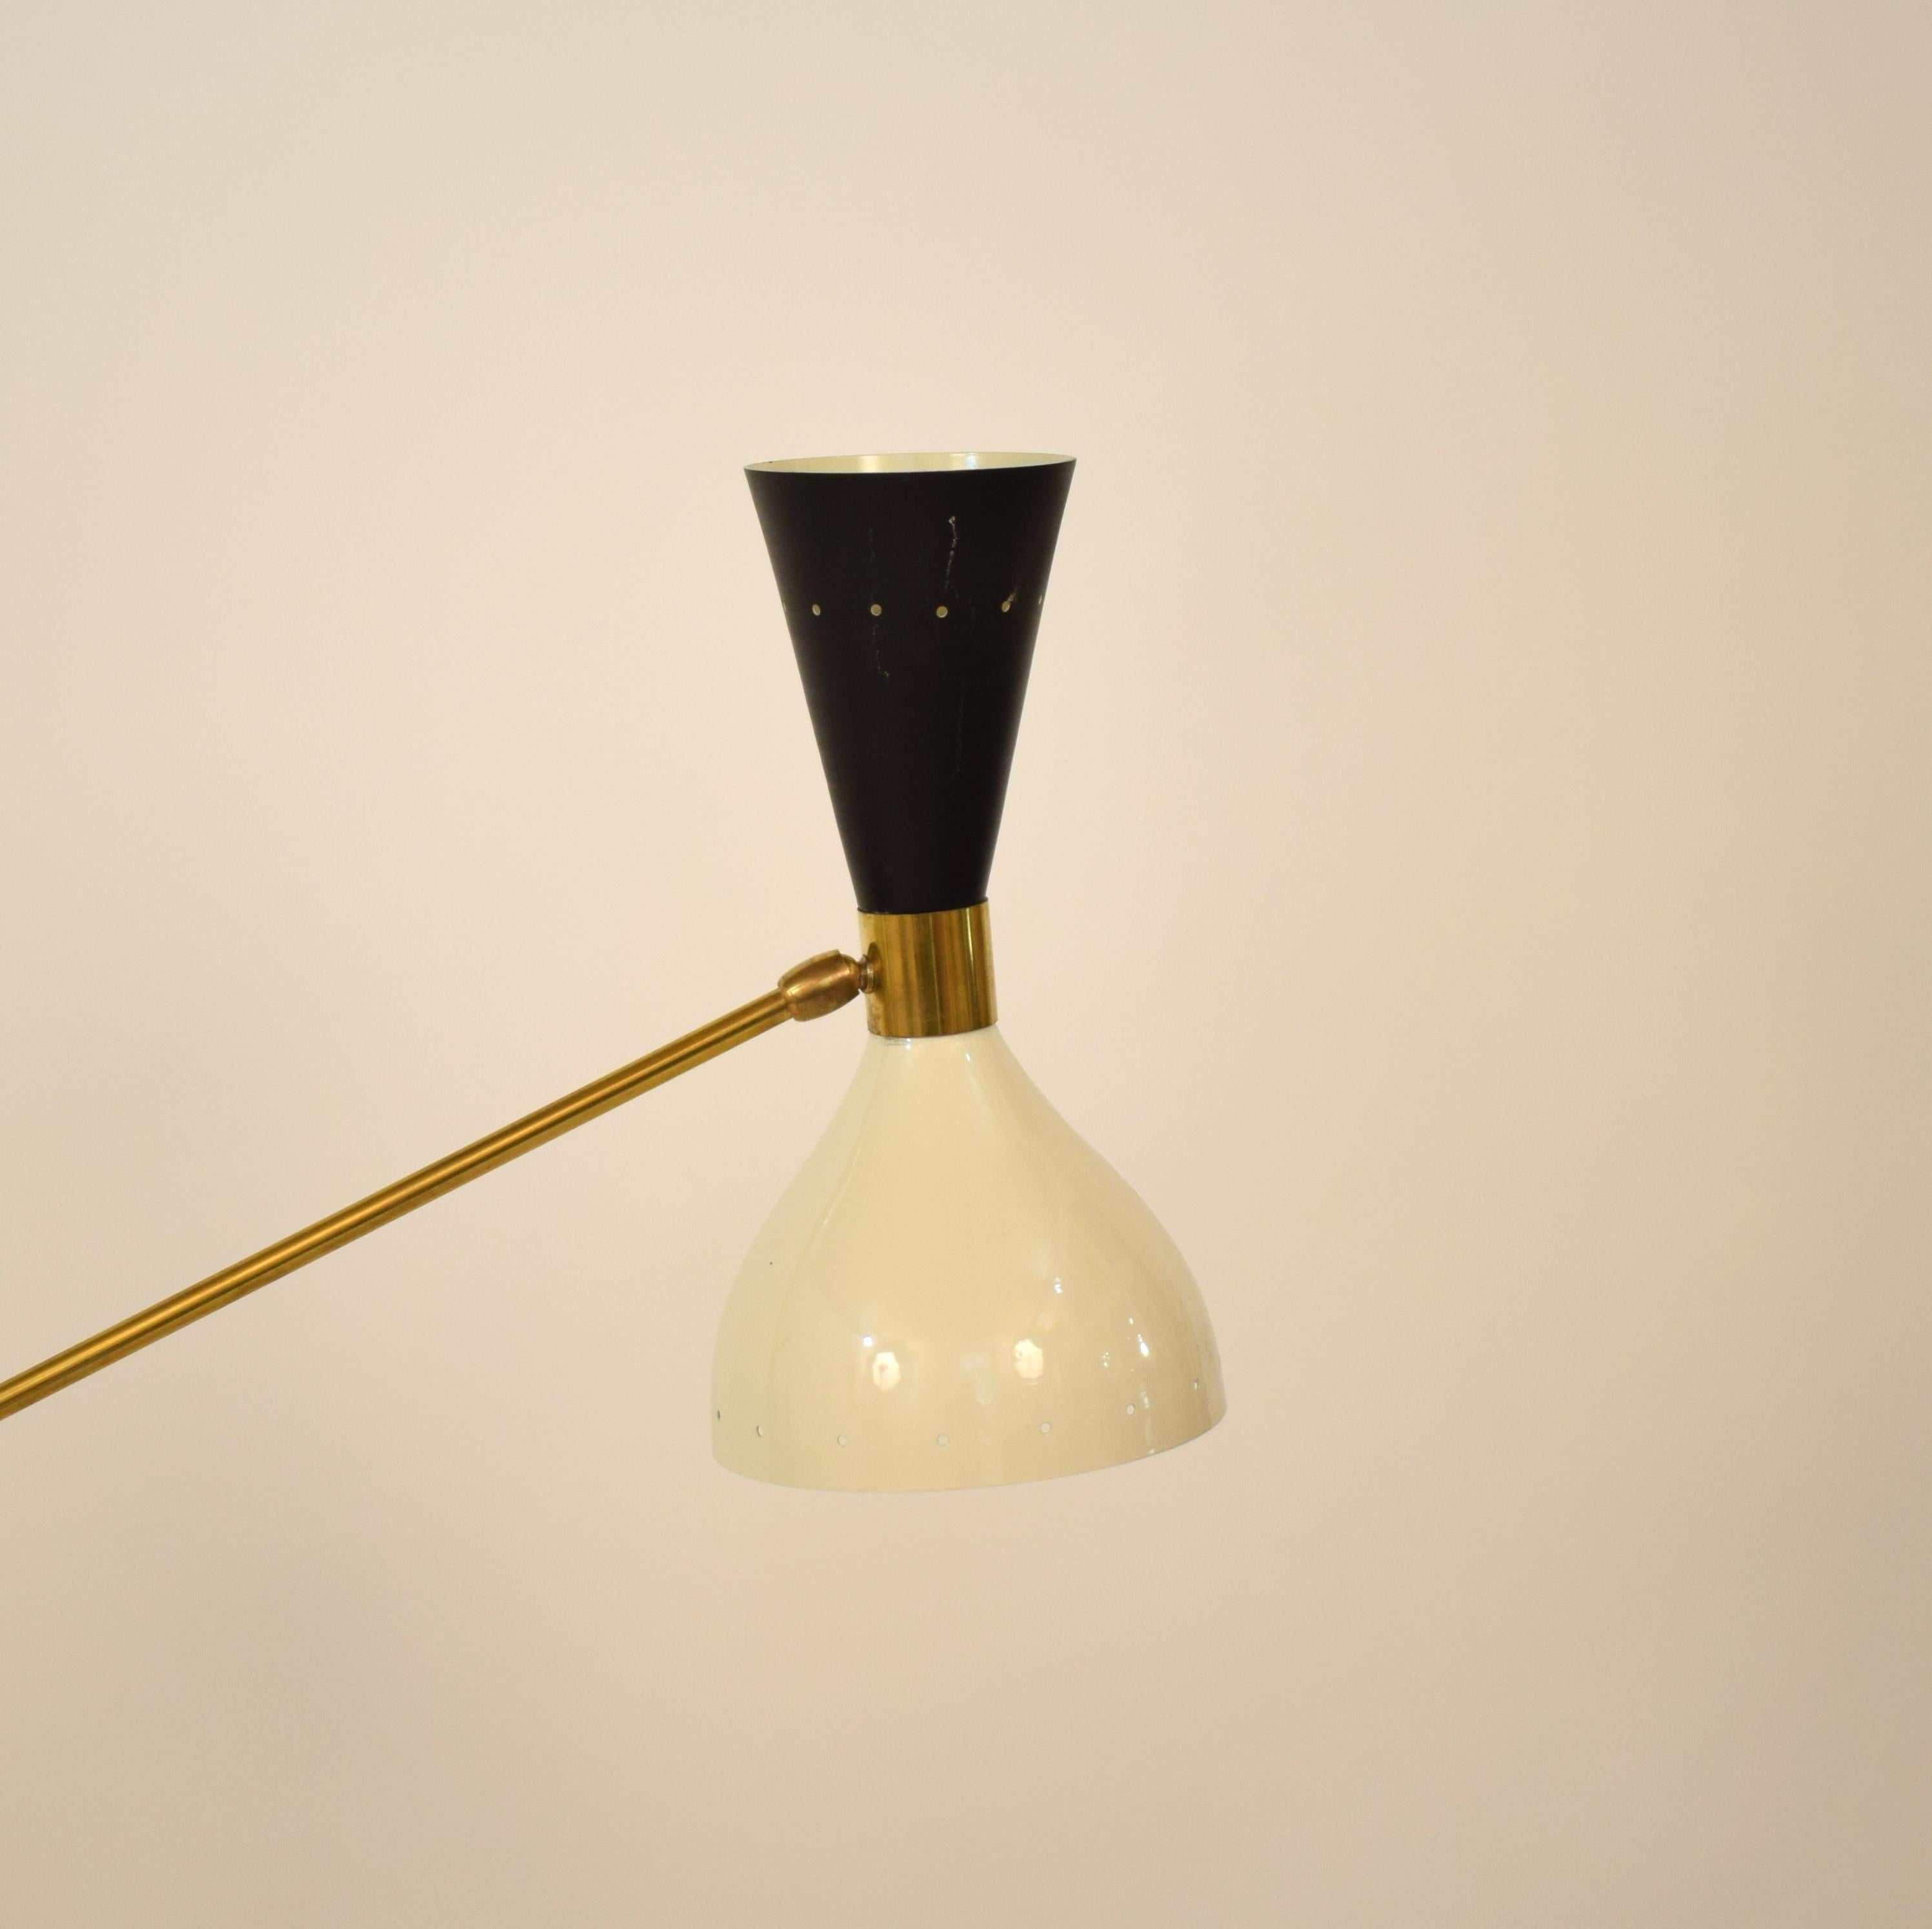 Midcentury Stilnovo Style Italian Floor Lamp Three-Arm Brass and Marble Black In Good Condition For Sale In Berlin, DE